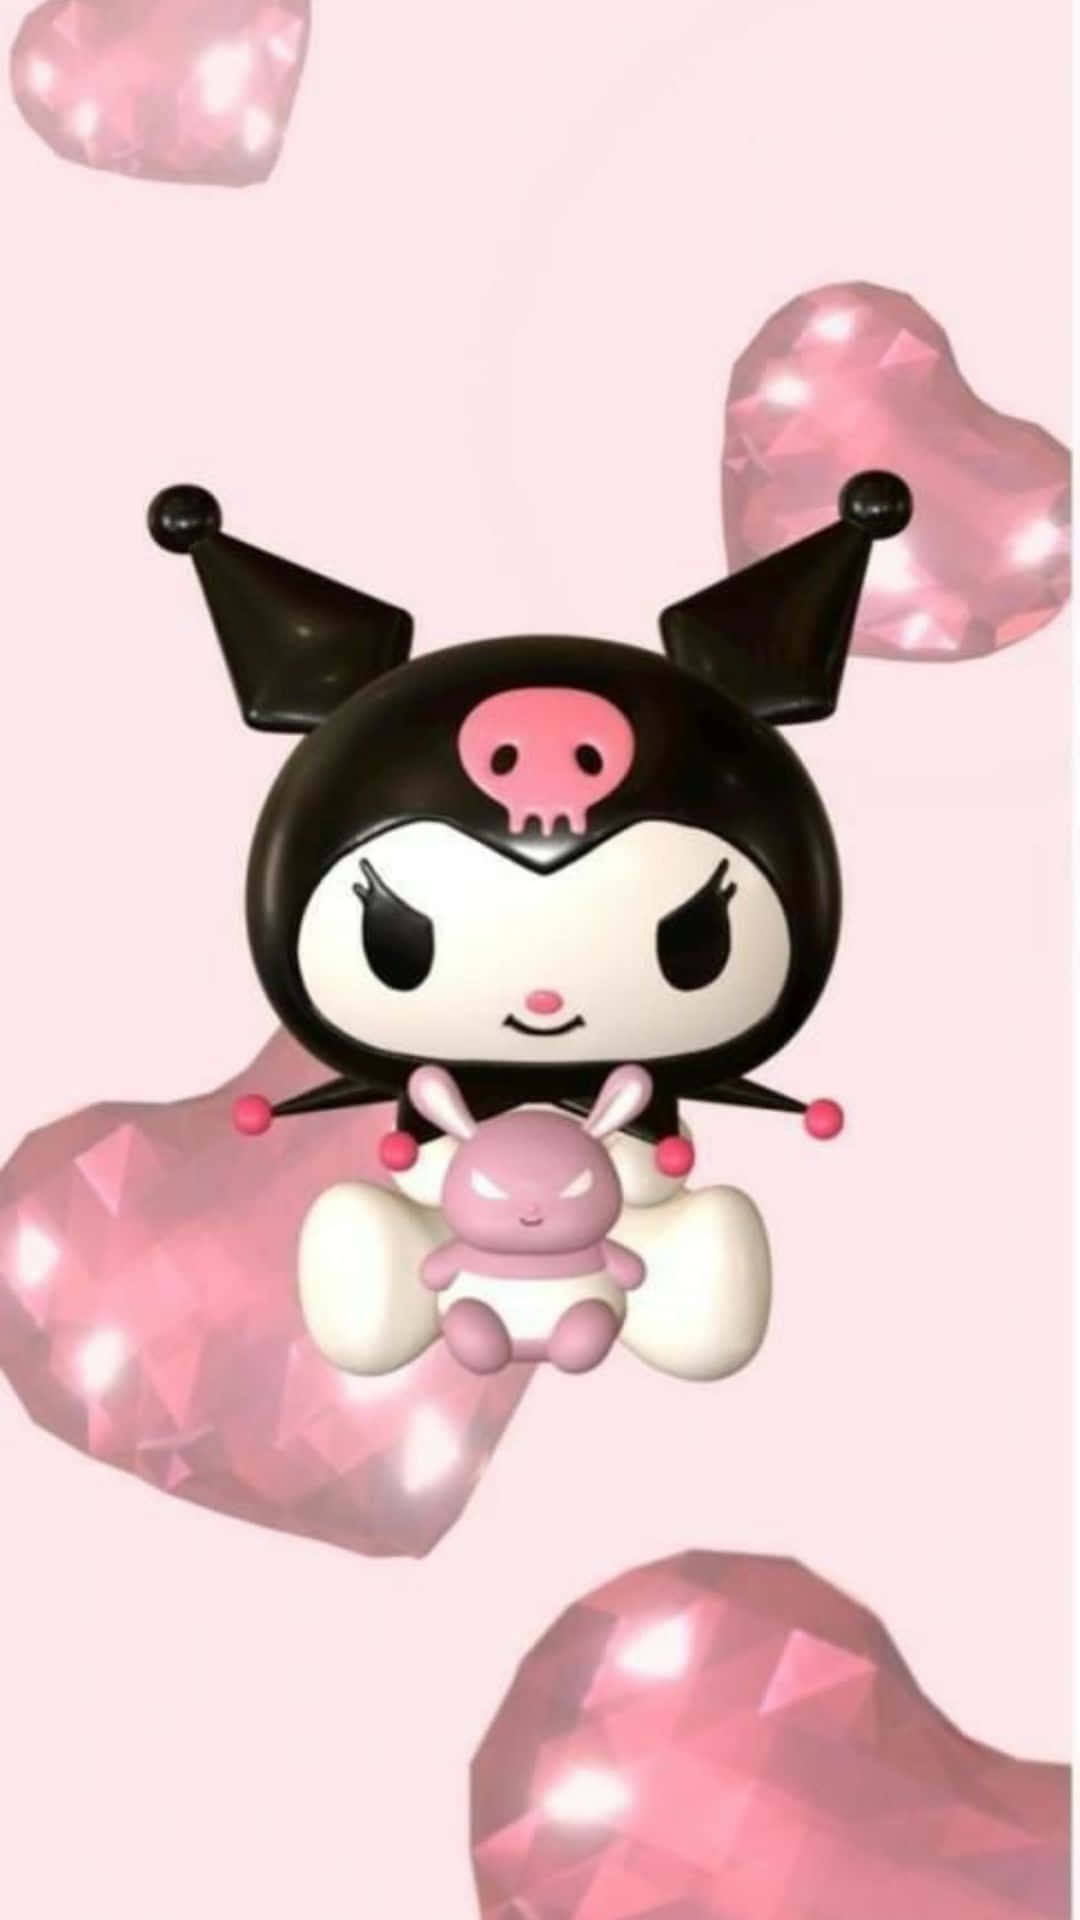 Kuromi, the mischievous yet adorable character from Sanrio, bringing kawaii vibes on your screen. Wallpaper